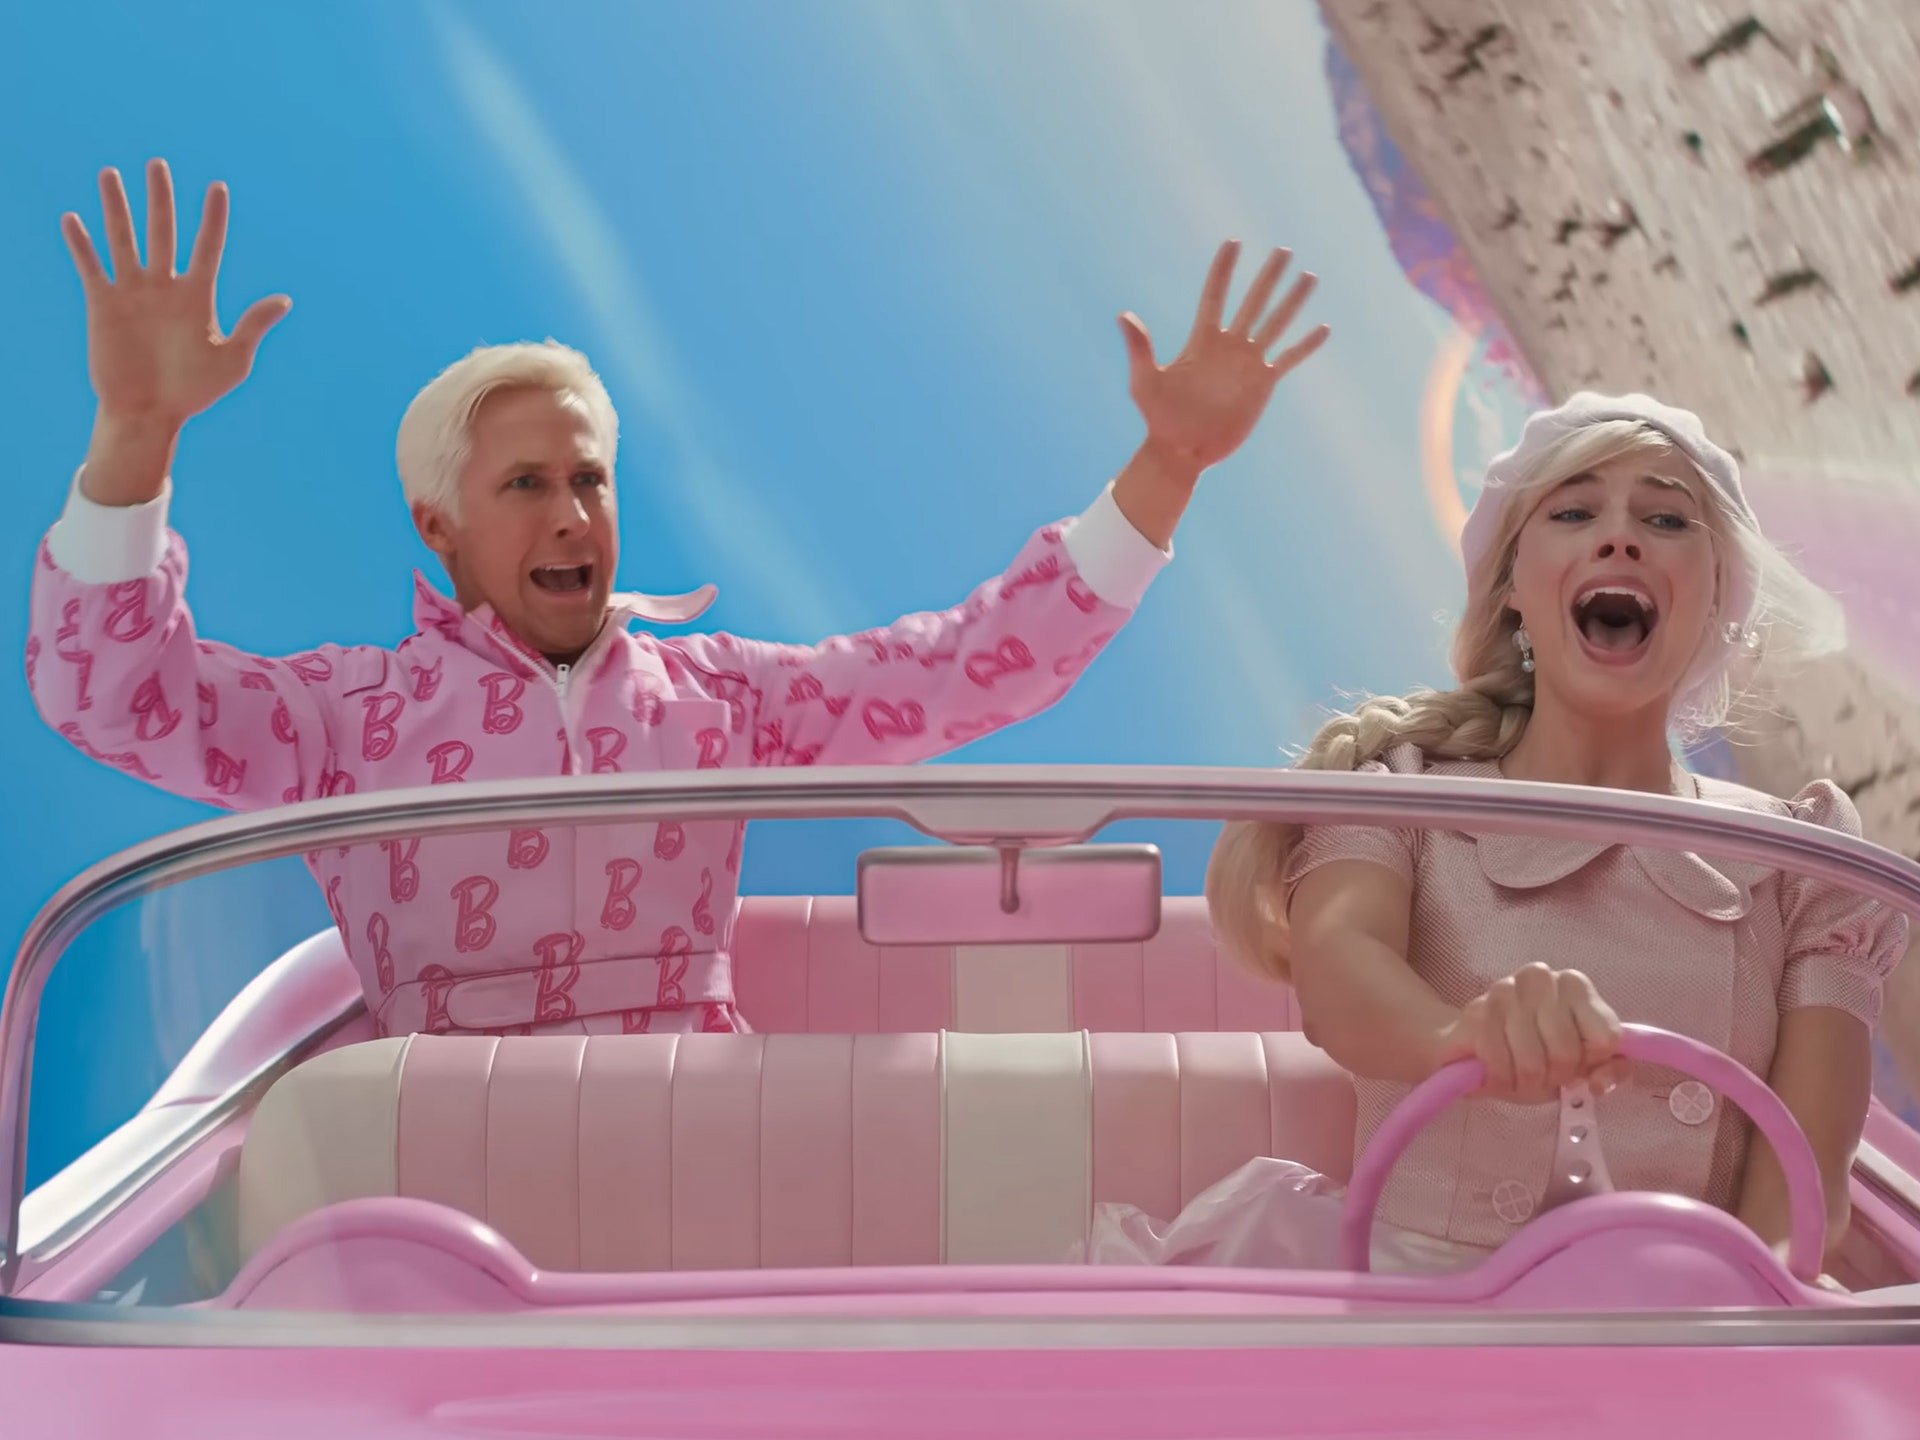 The Barbie movie trailer is somehow the biggest cultural event of the year so far